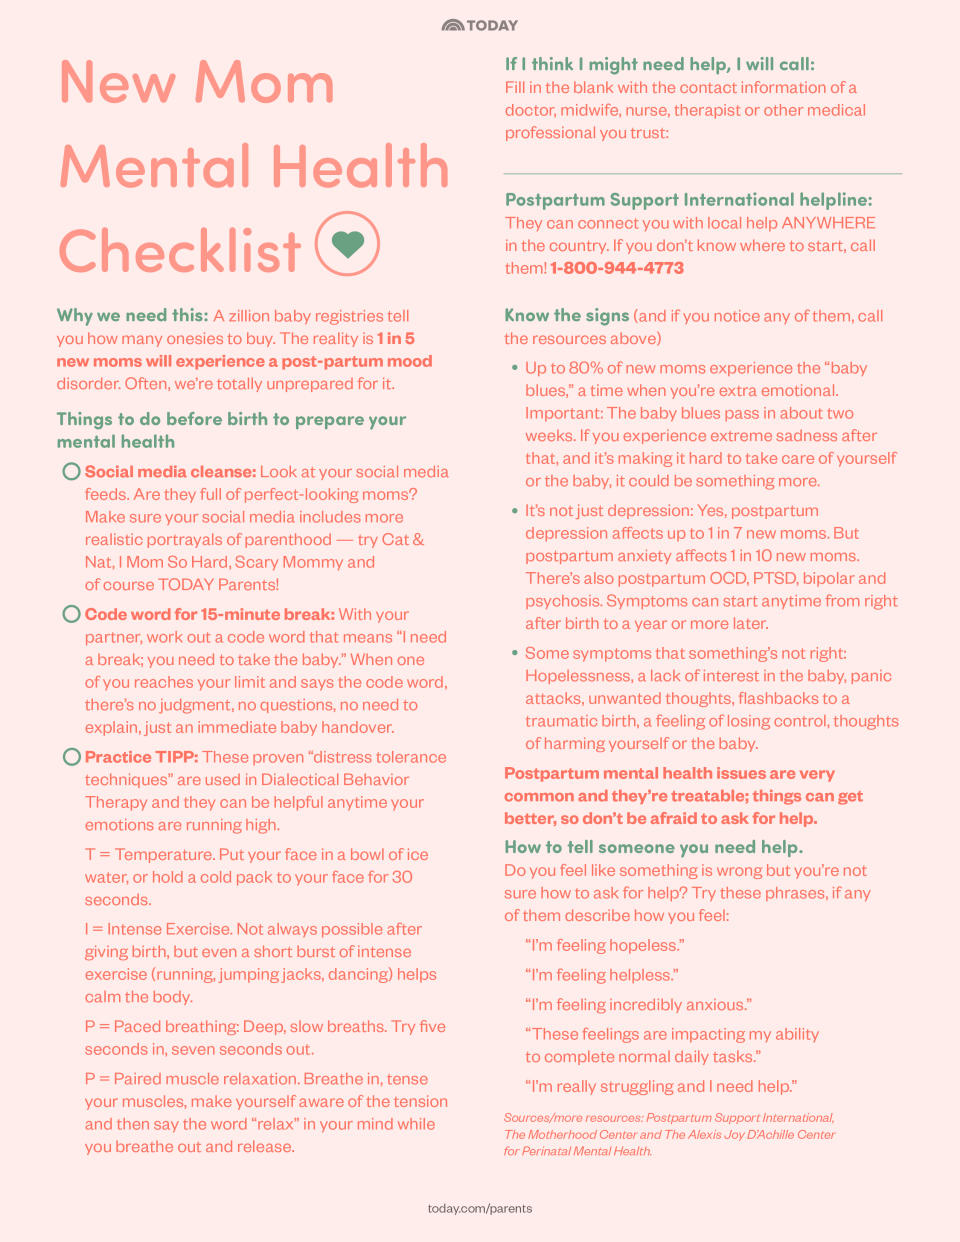 Graphic of New Mom Mental Health Checklist (TODAY)